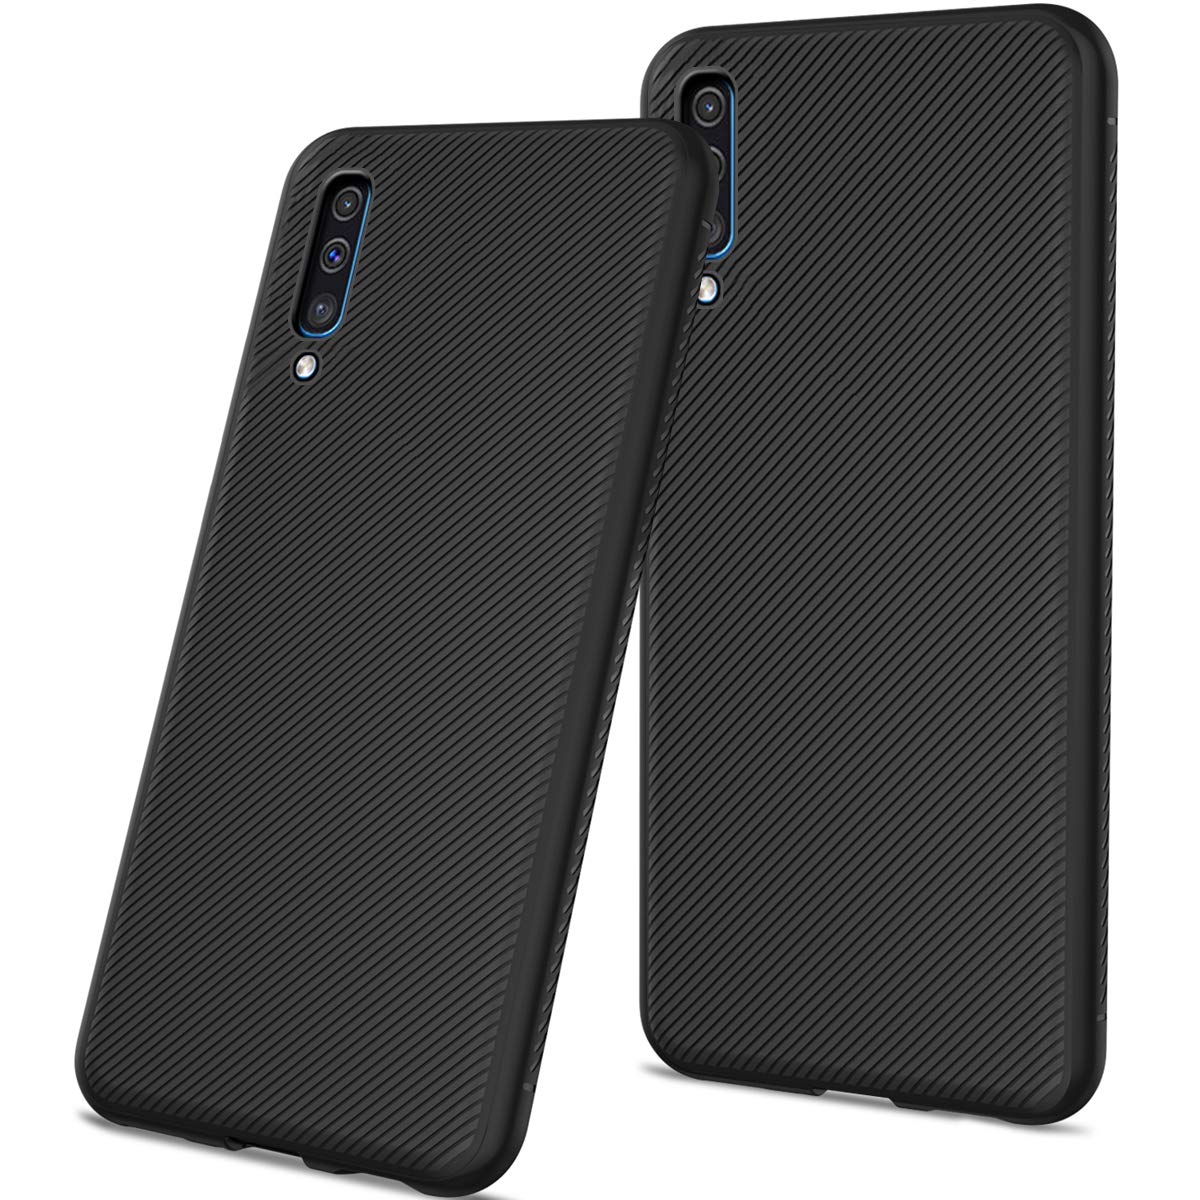 Bakeey-Carbon-Fiber-Protective-Case-For-Samsung-Galaxy-A50-2019-Shockproof-Soft-TPU-Back-Cover-1455285-1